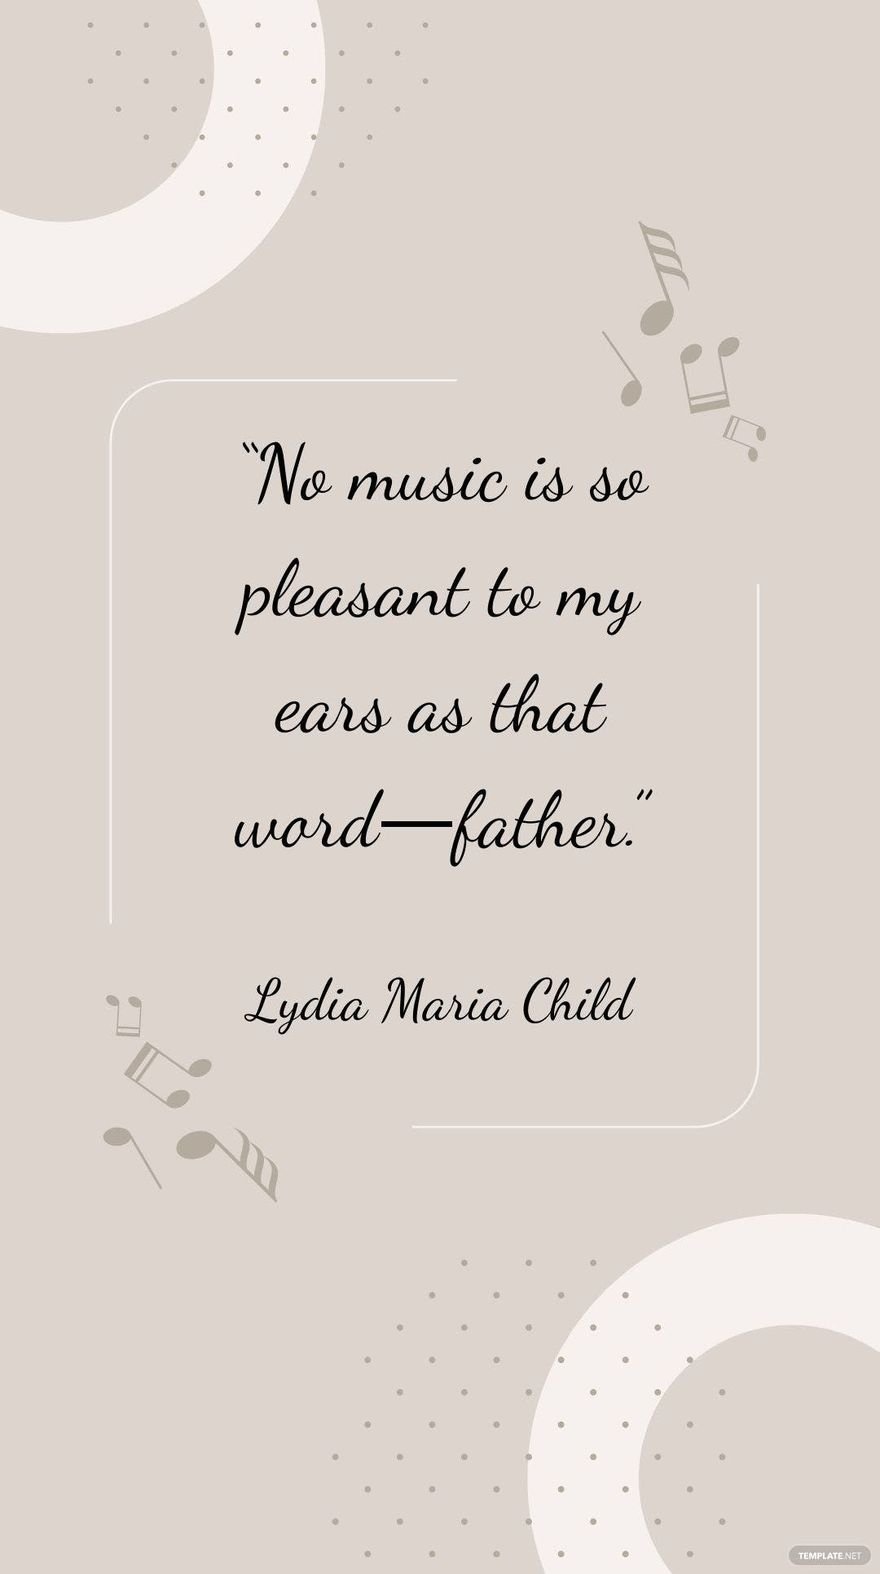 Lydia Maria Child - “No music is so pleasant to my ears as that word father.”